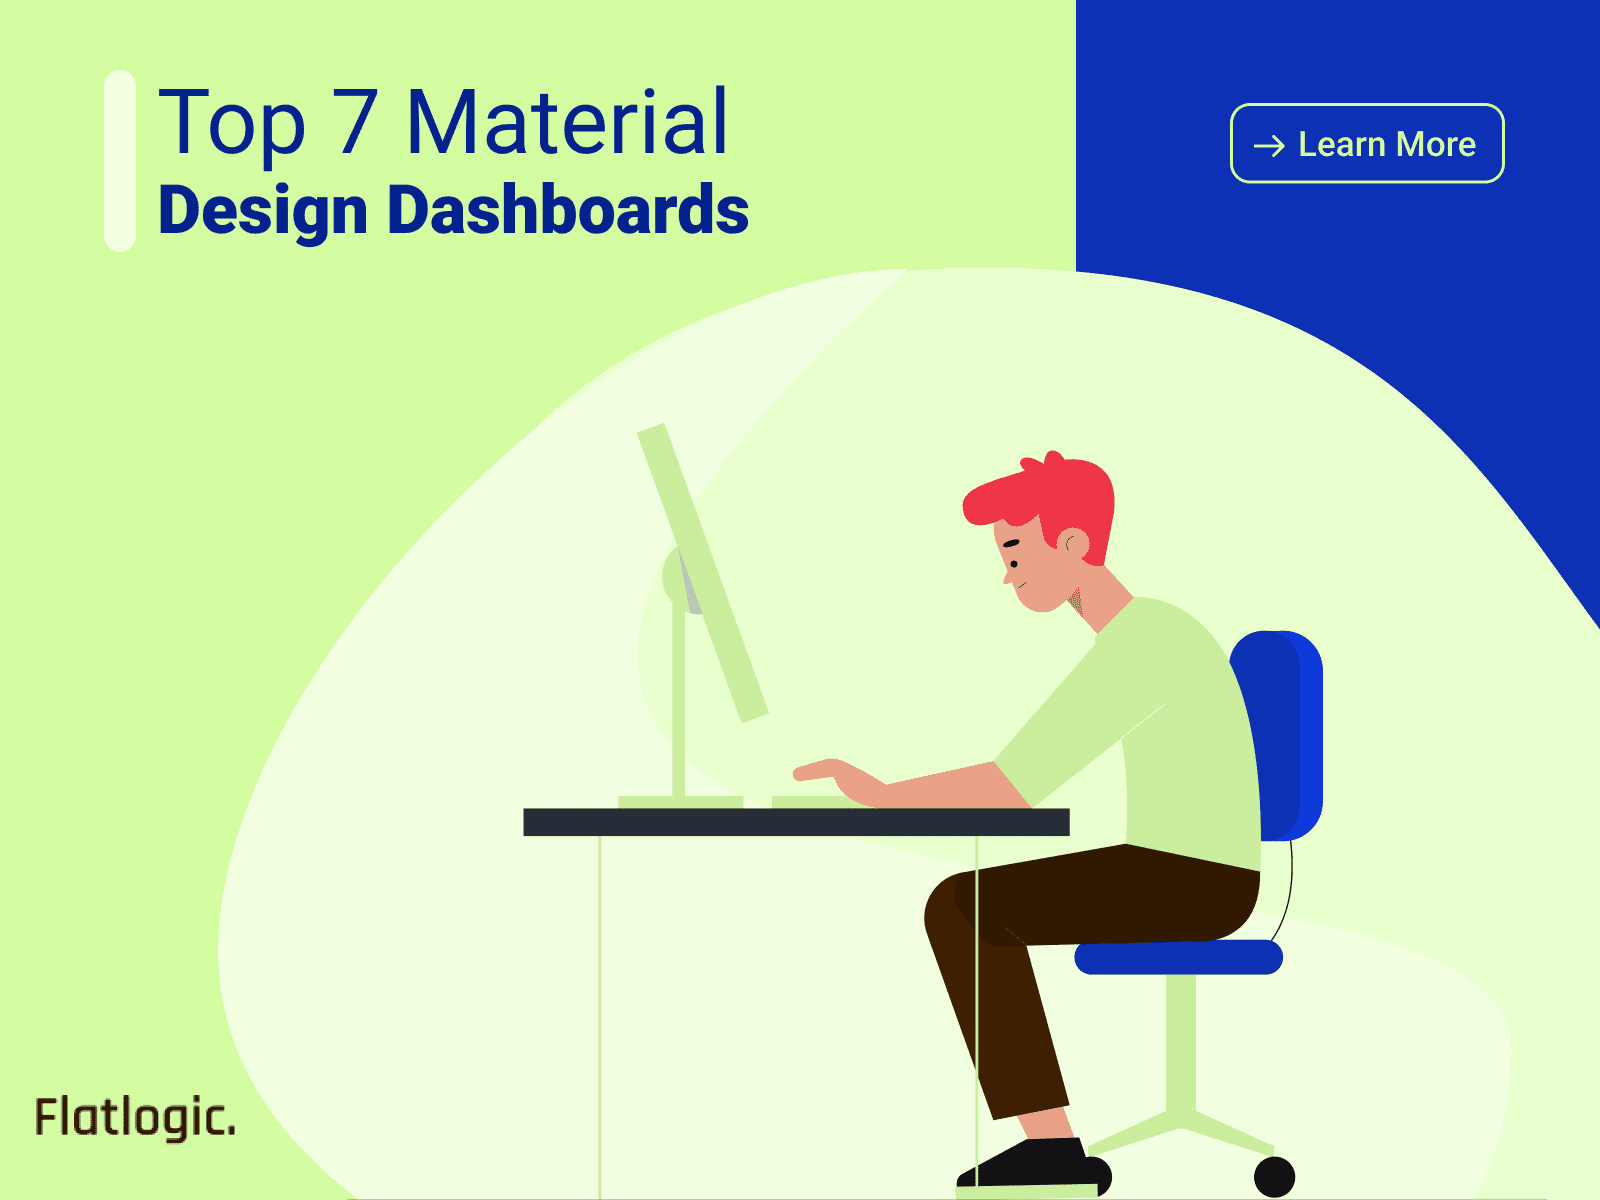 Top 7 Material Design Dashboards to Use in 2022